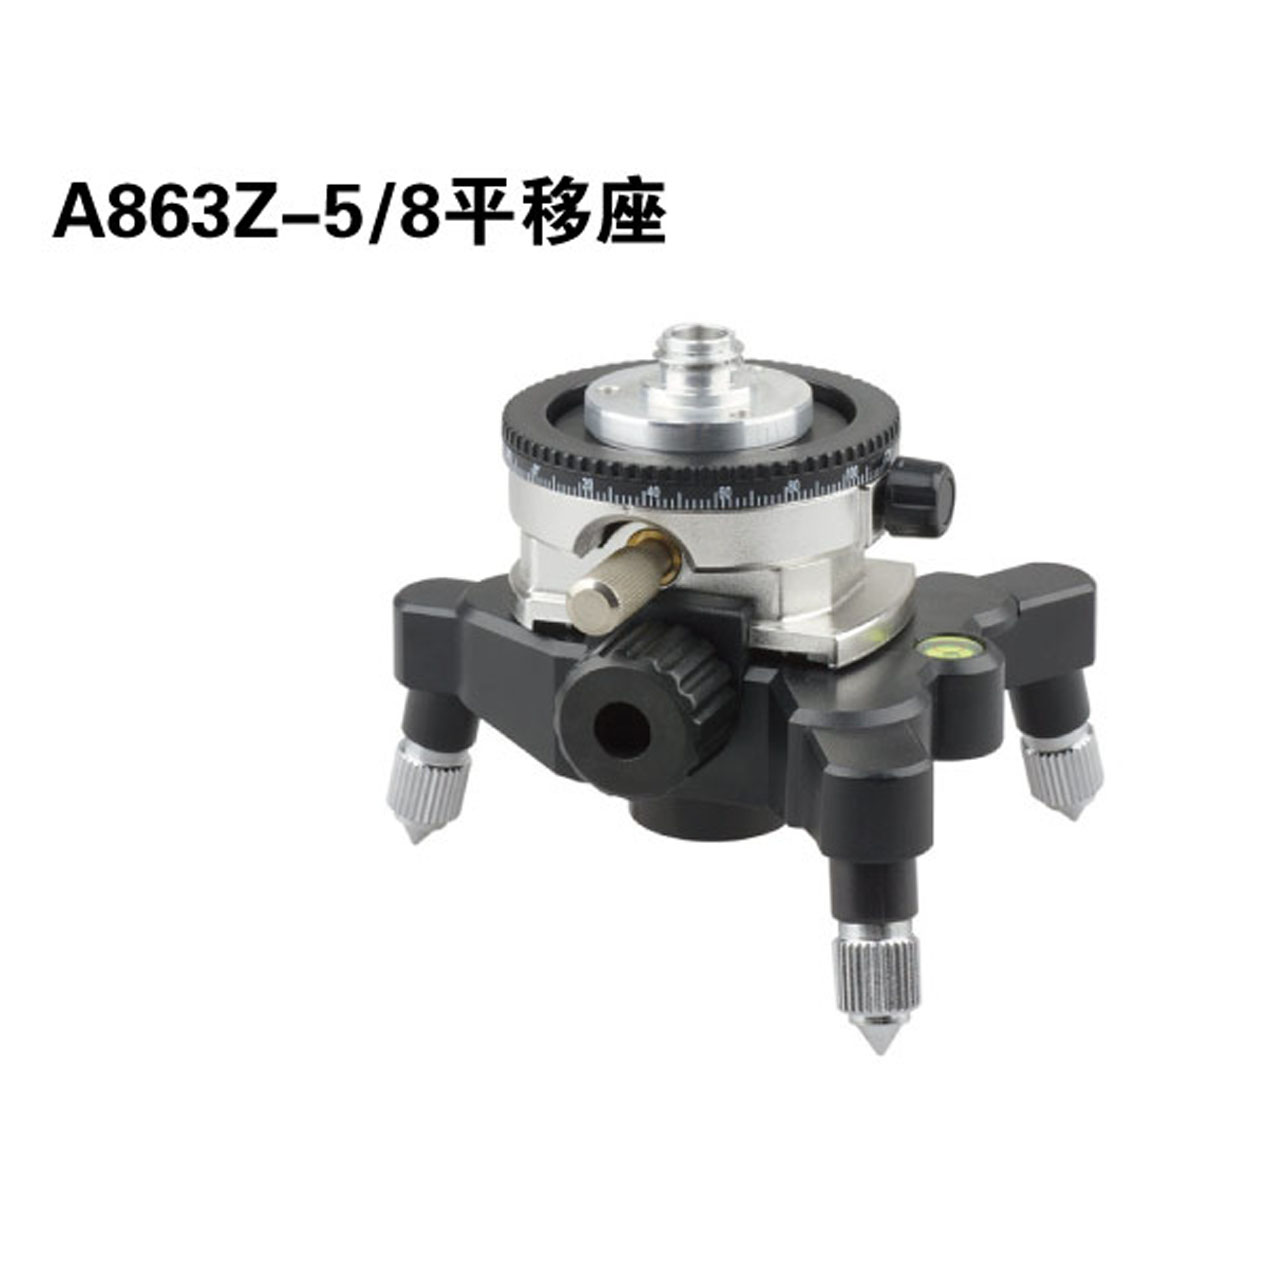 A863Z-5/8 Connecting Base